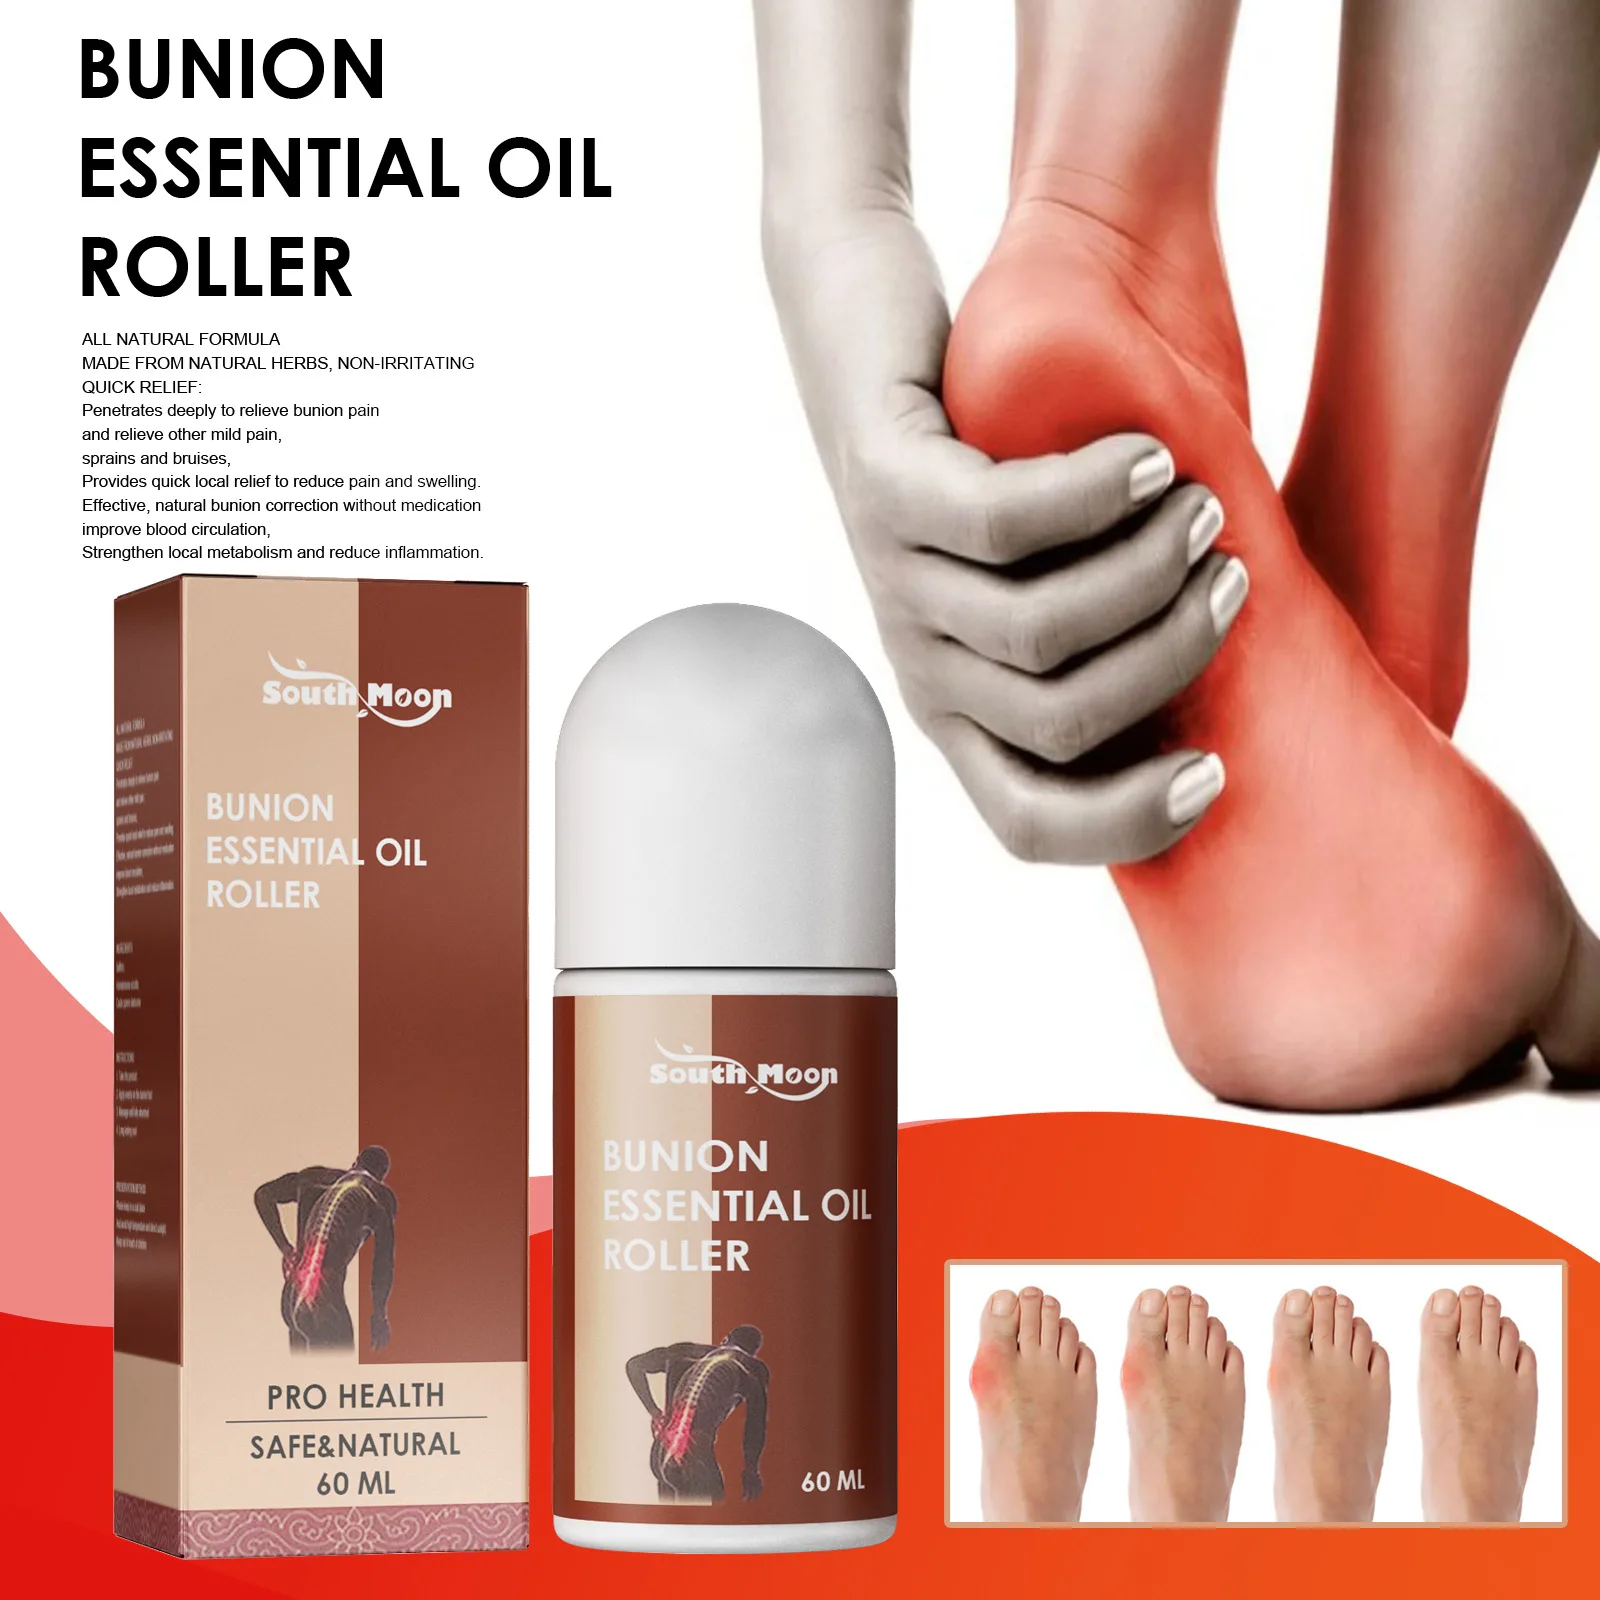 South Moon 60ml Bunion Essential Oil Roller Correct Thumb Valgus Pain Relief Foot Care Handy Free Shipping